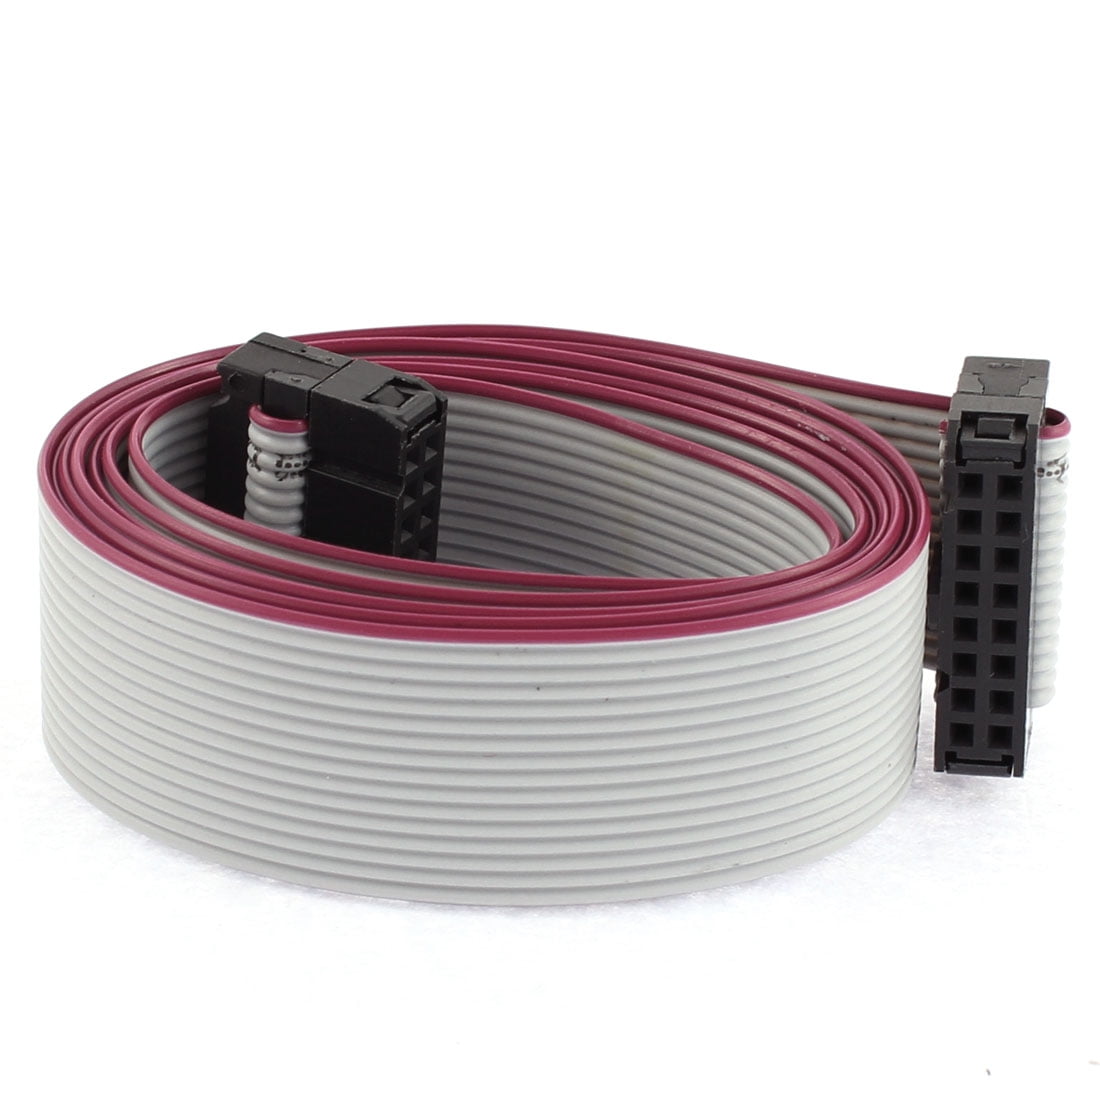 FR-1606 6 inch 16-Pin 2x8-Pin 2.54-Pitch Female 16-Wire IDC Flat Ribbon Cable 